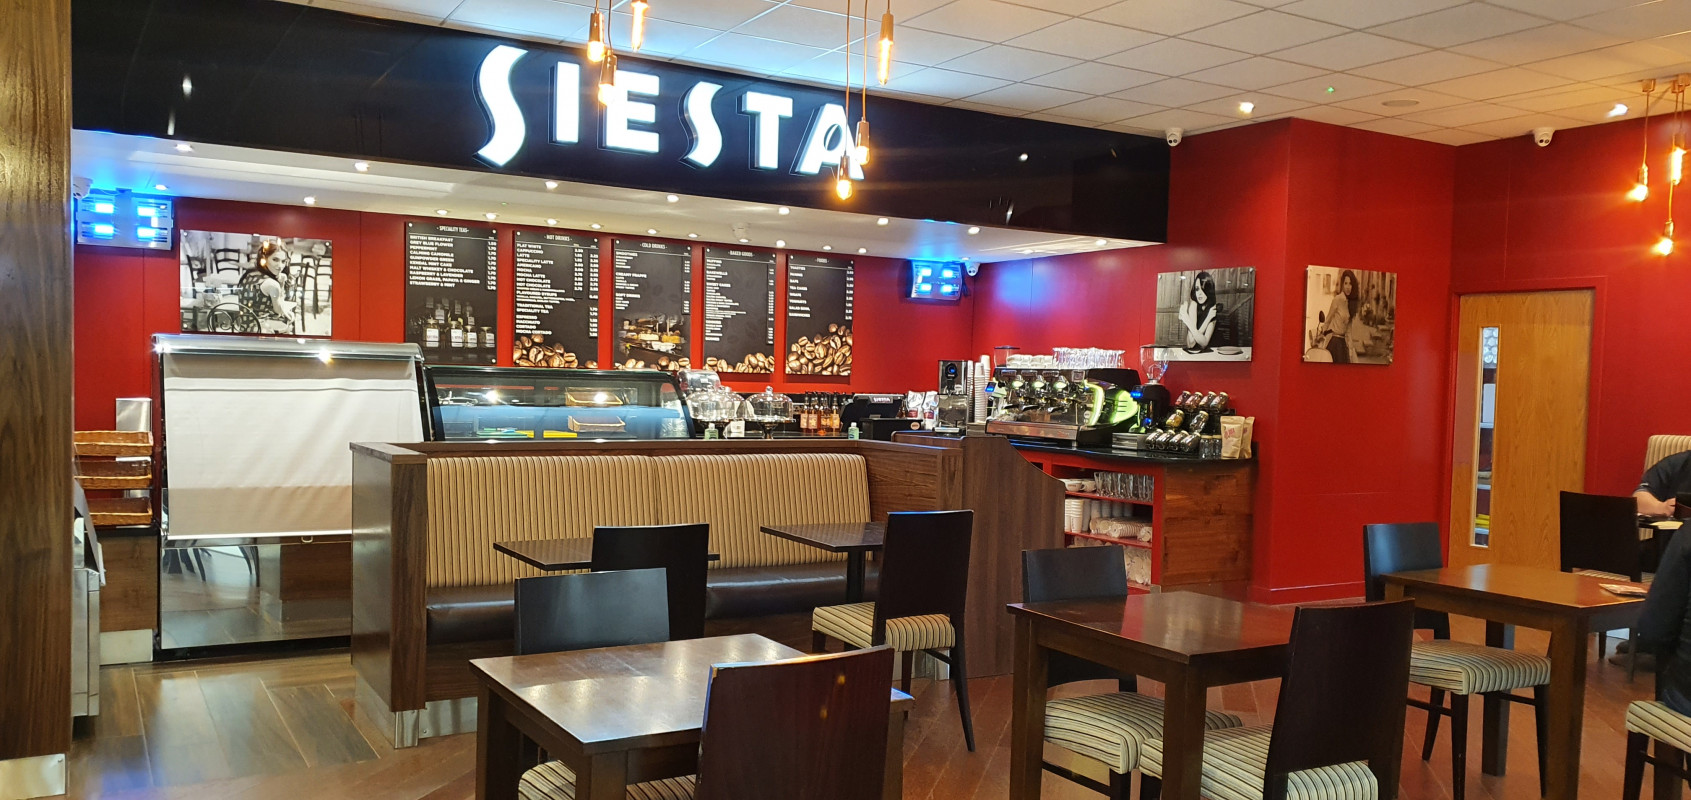 New Image for SIESTA COFFEE OPENS TODAY AT THE CONCOURSE SHOPPING CENTRE